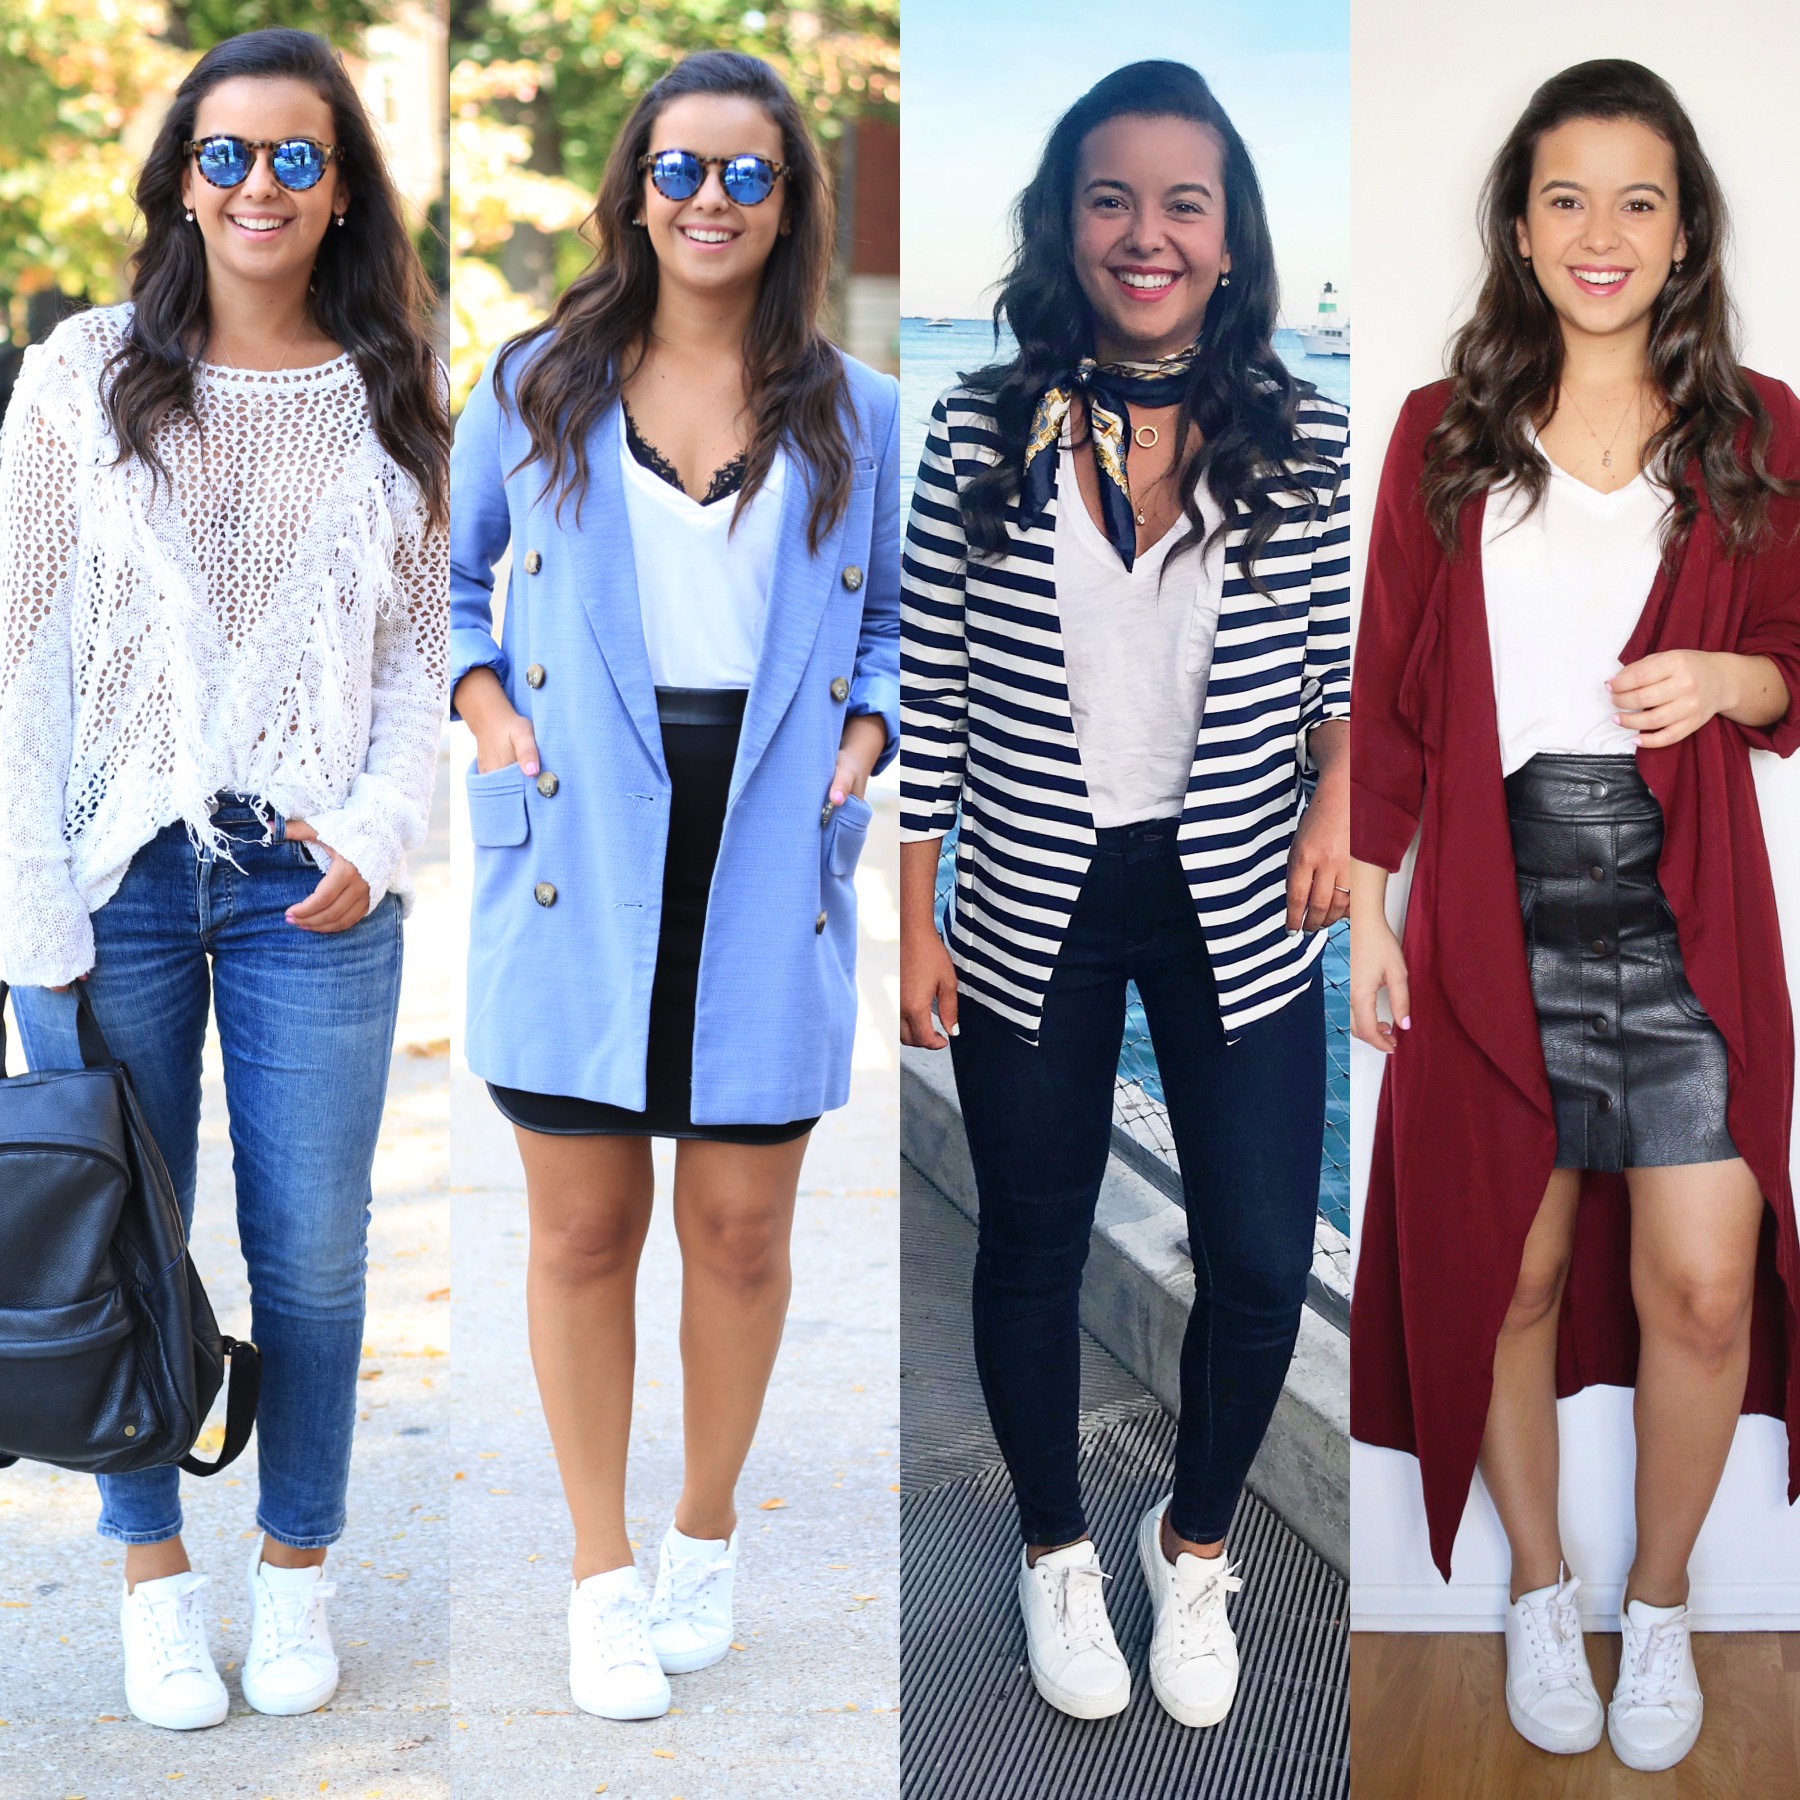 Style On-The-Go: White Sneakers